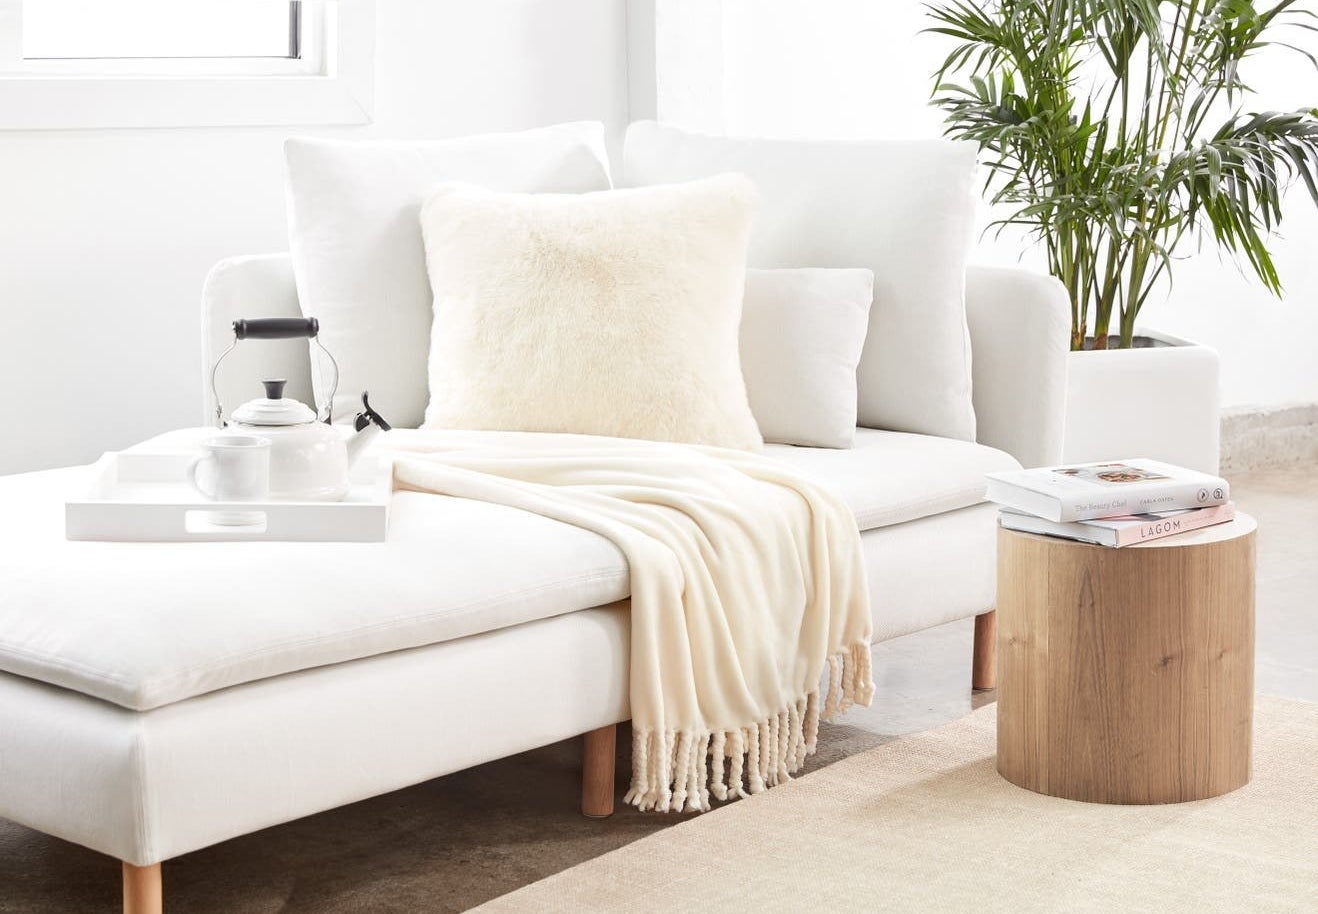 Cream plush blanket on a white couch